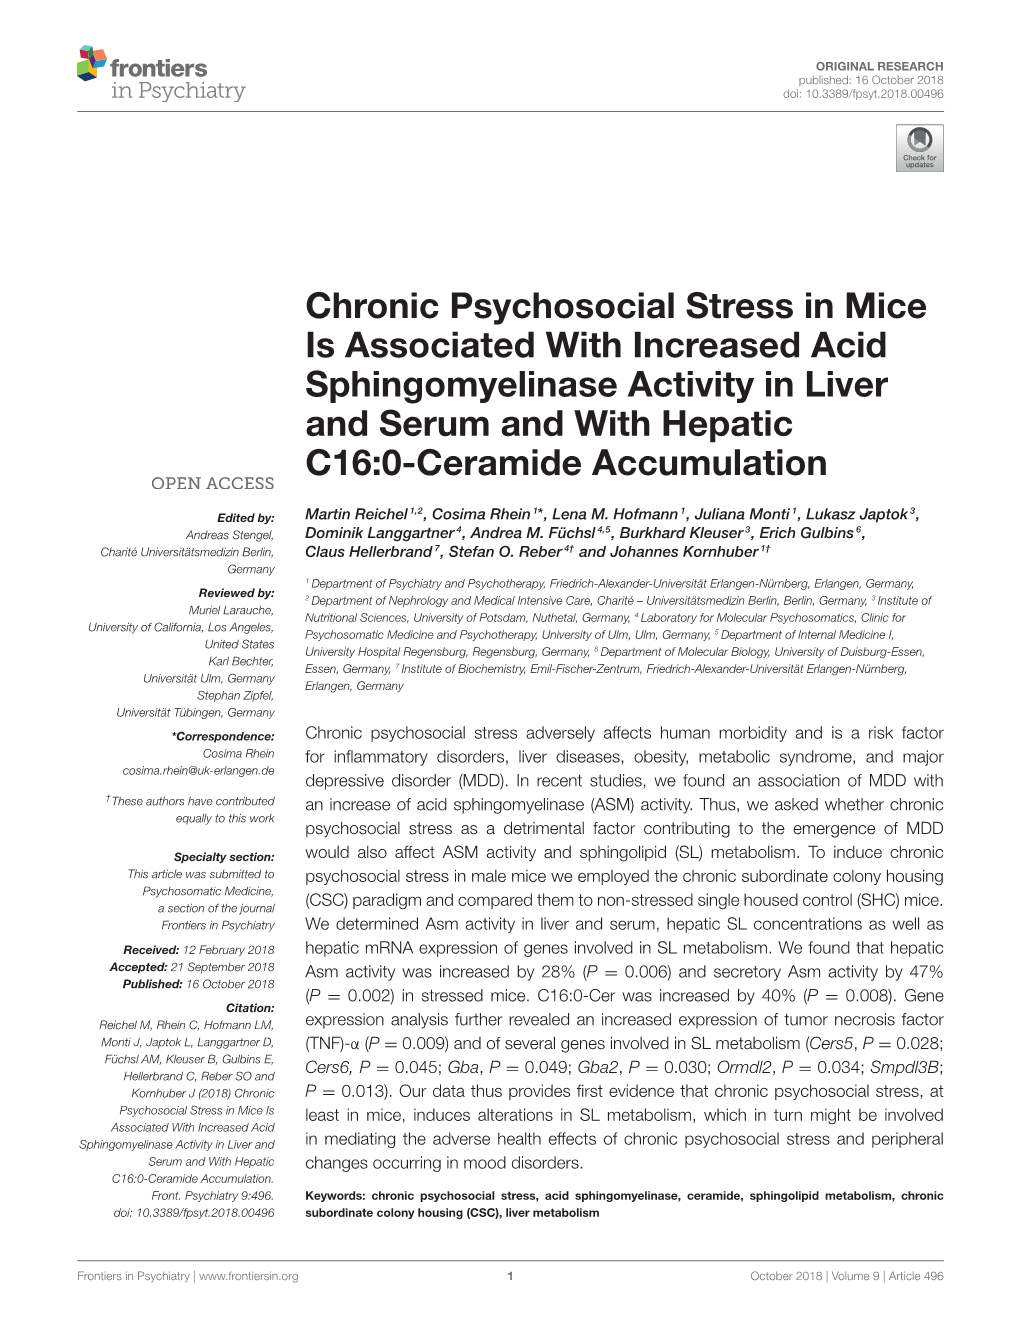 Chronic Psychosocial Stress in Mice Is Associated with Increased Acid Sphingomyelinase Activity in Liver and Serum and with Hepatic C16:0-Ceramide Accumulation